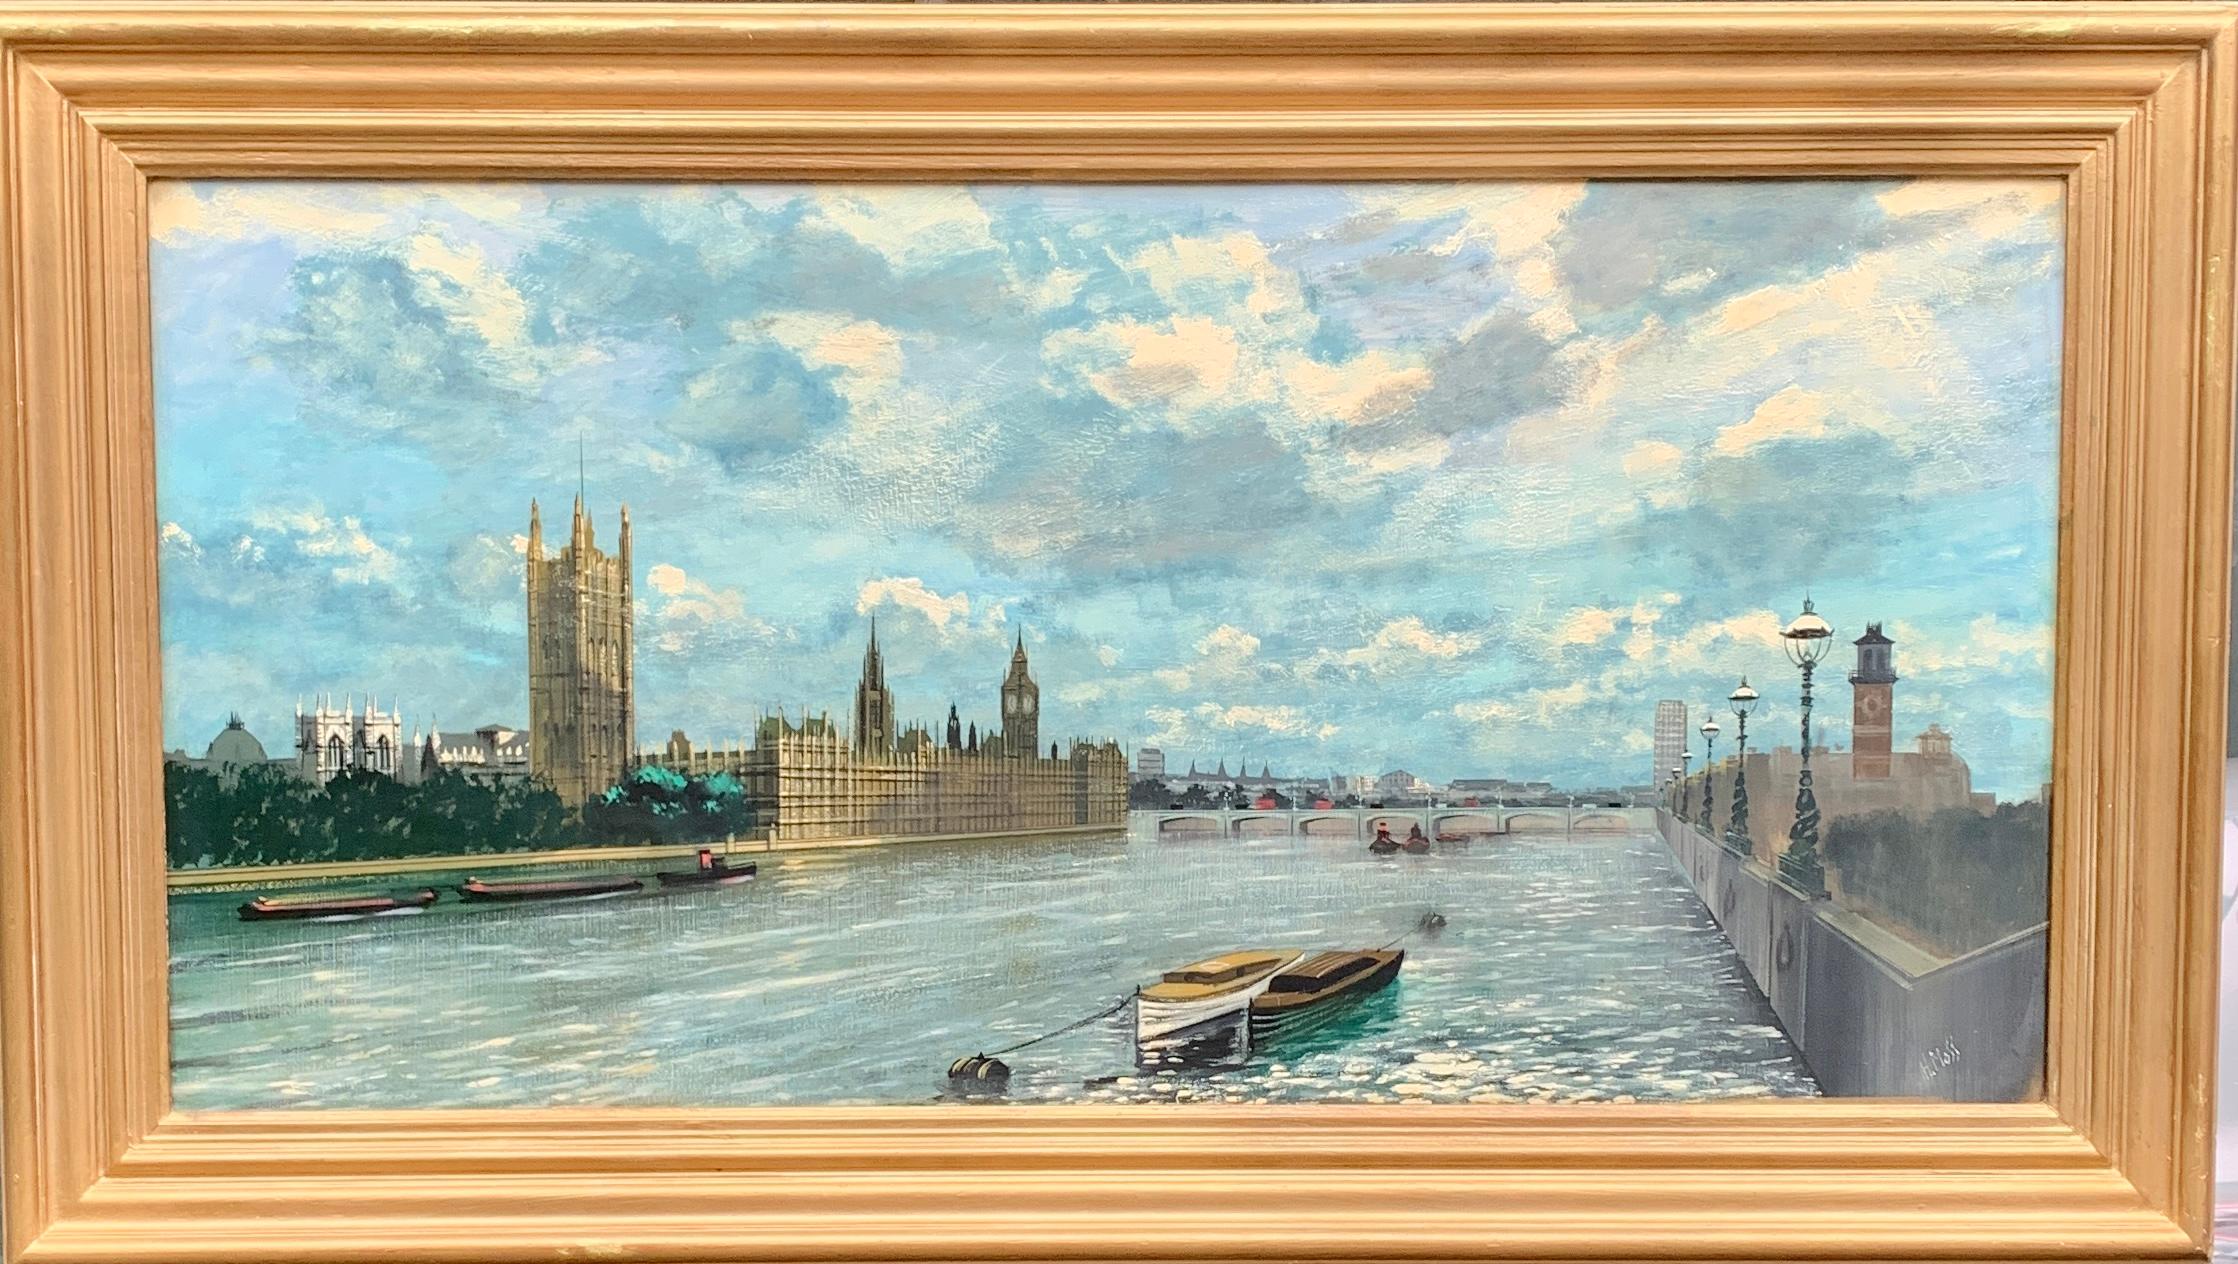 Late 20th century view of the the River Thames, at Westminster, with Big Ben